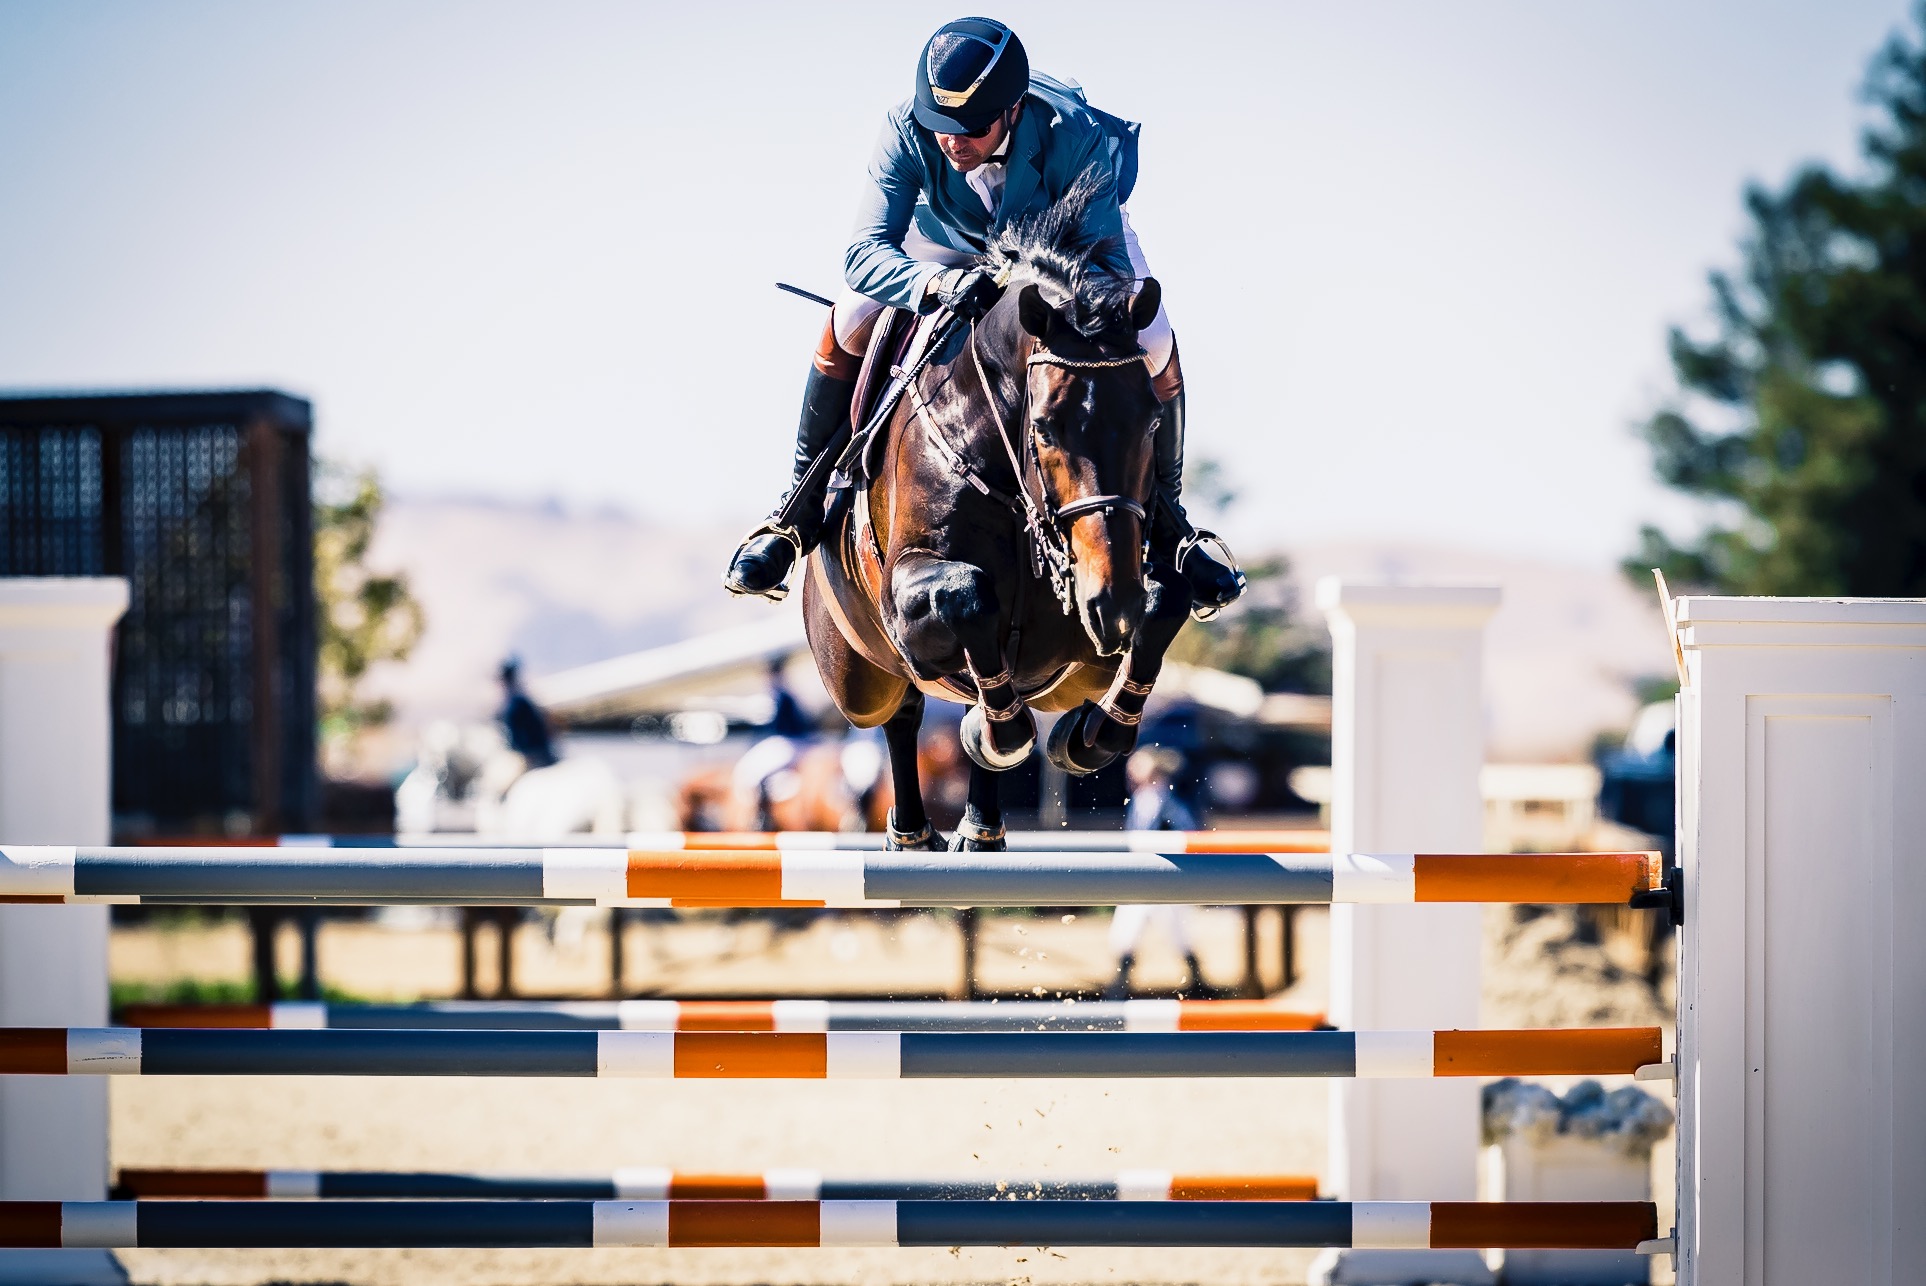 Mariano is on Edesa’s Wendeschon Z. 15k welcome prix at Sonoma.